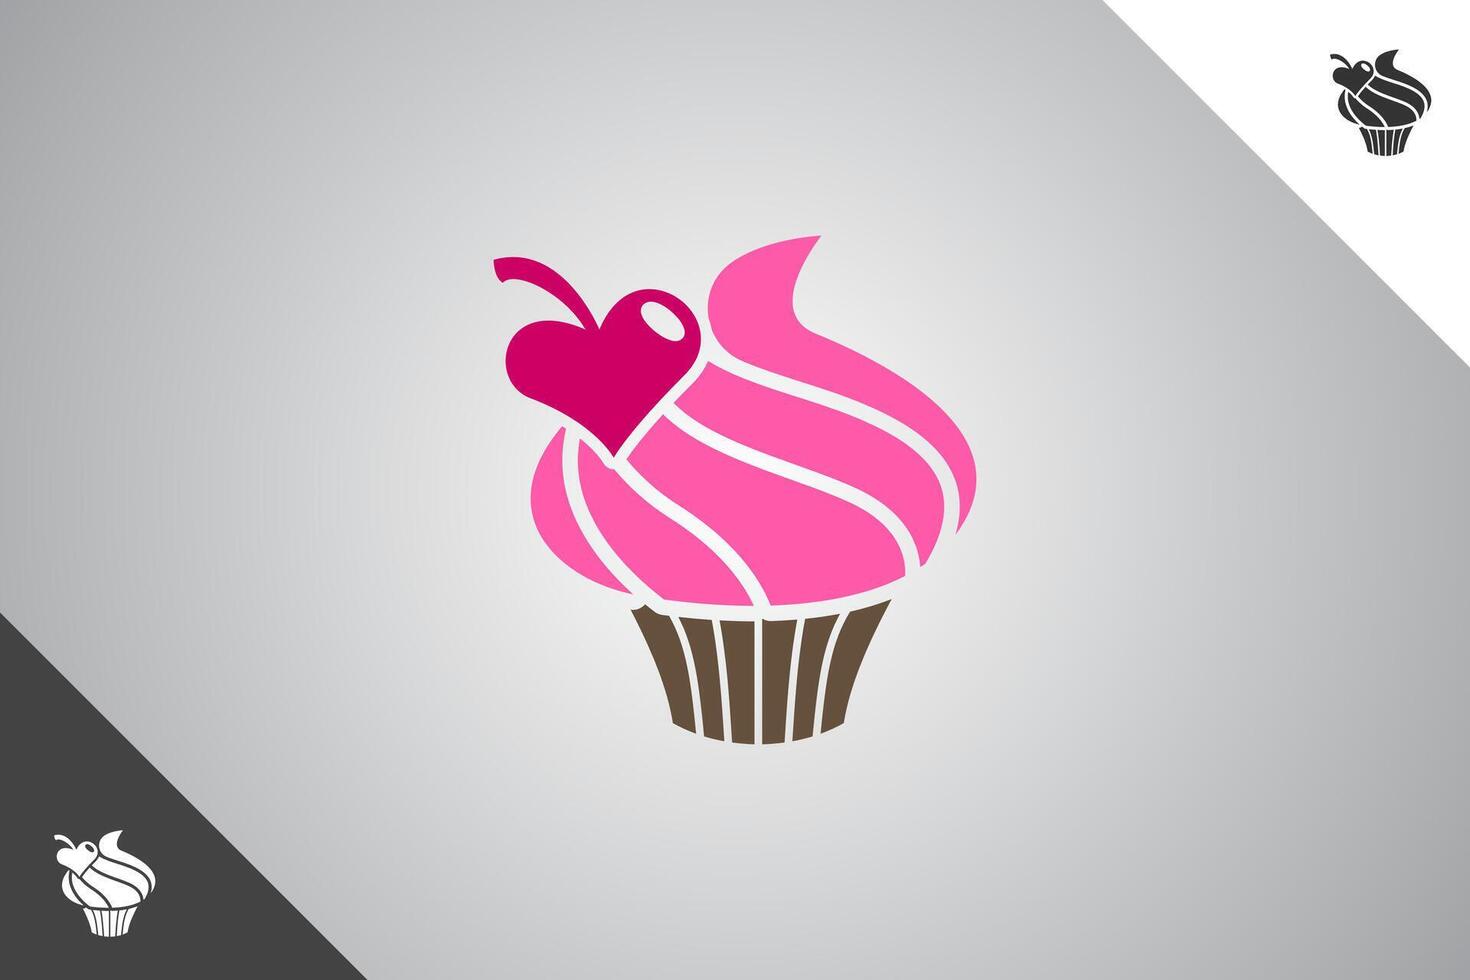 Cup cake logo. Bakery, cakes and pastries logo identity template. Perfect logo for business related to bakery, cakes and pastries. Isolated background. Vector eps 10.